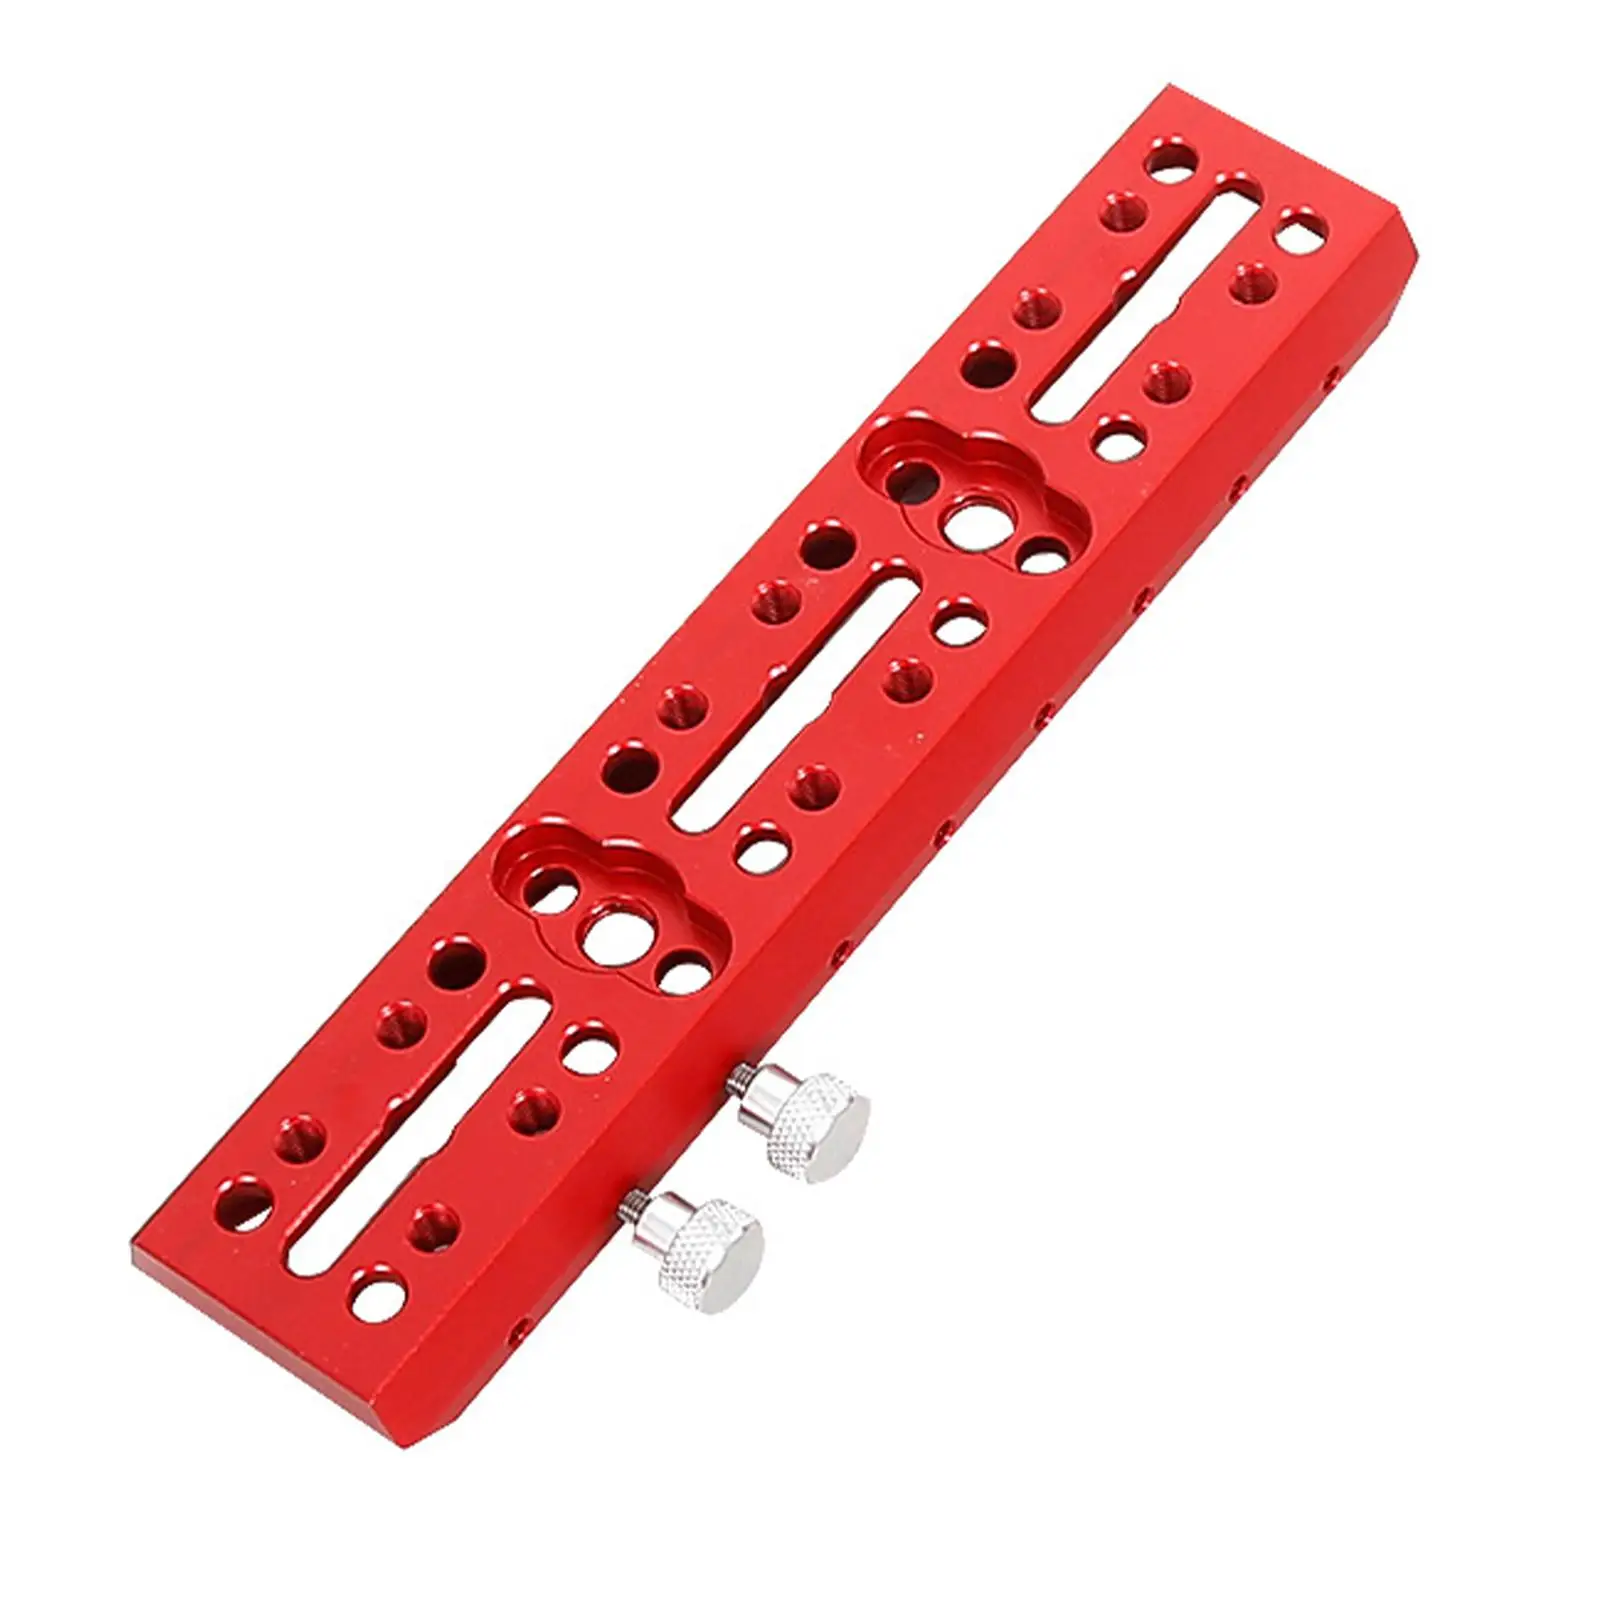 Telescope Dovetail Mounting Plate with Screw for 2042 Sky Astrophotography